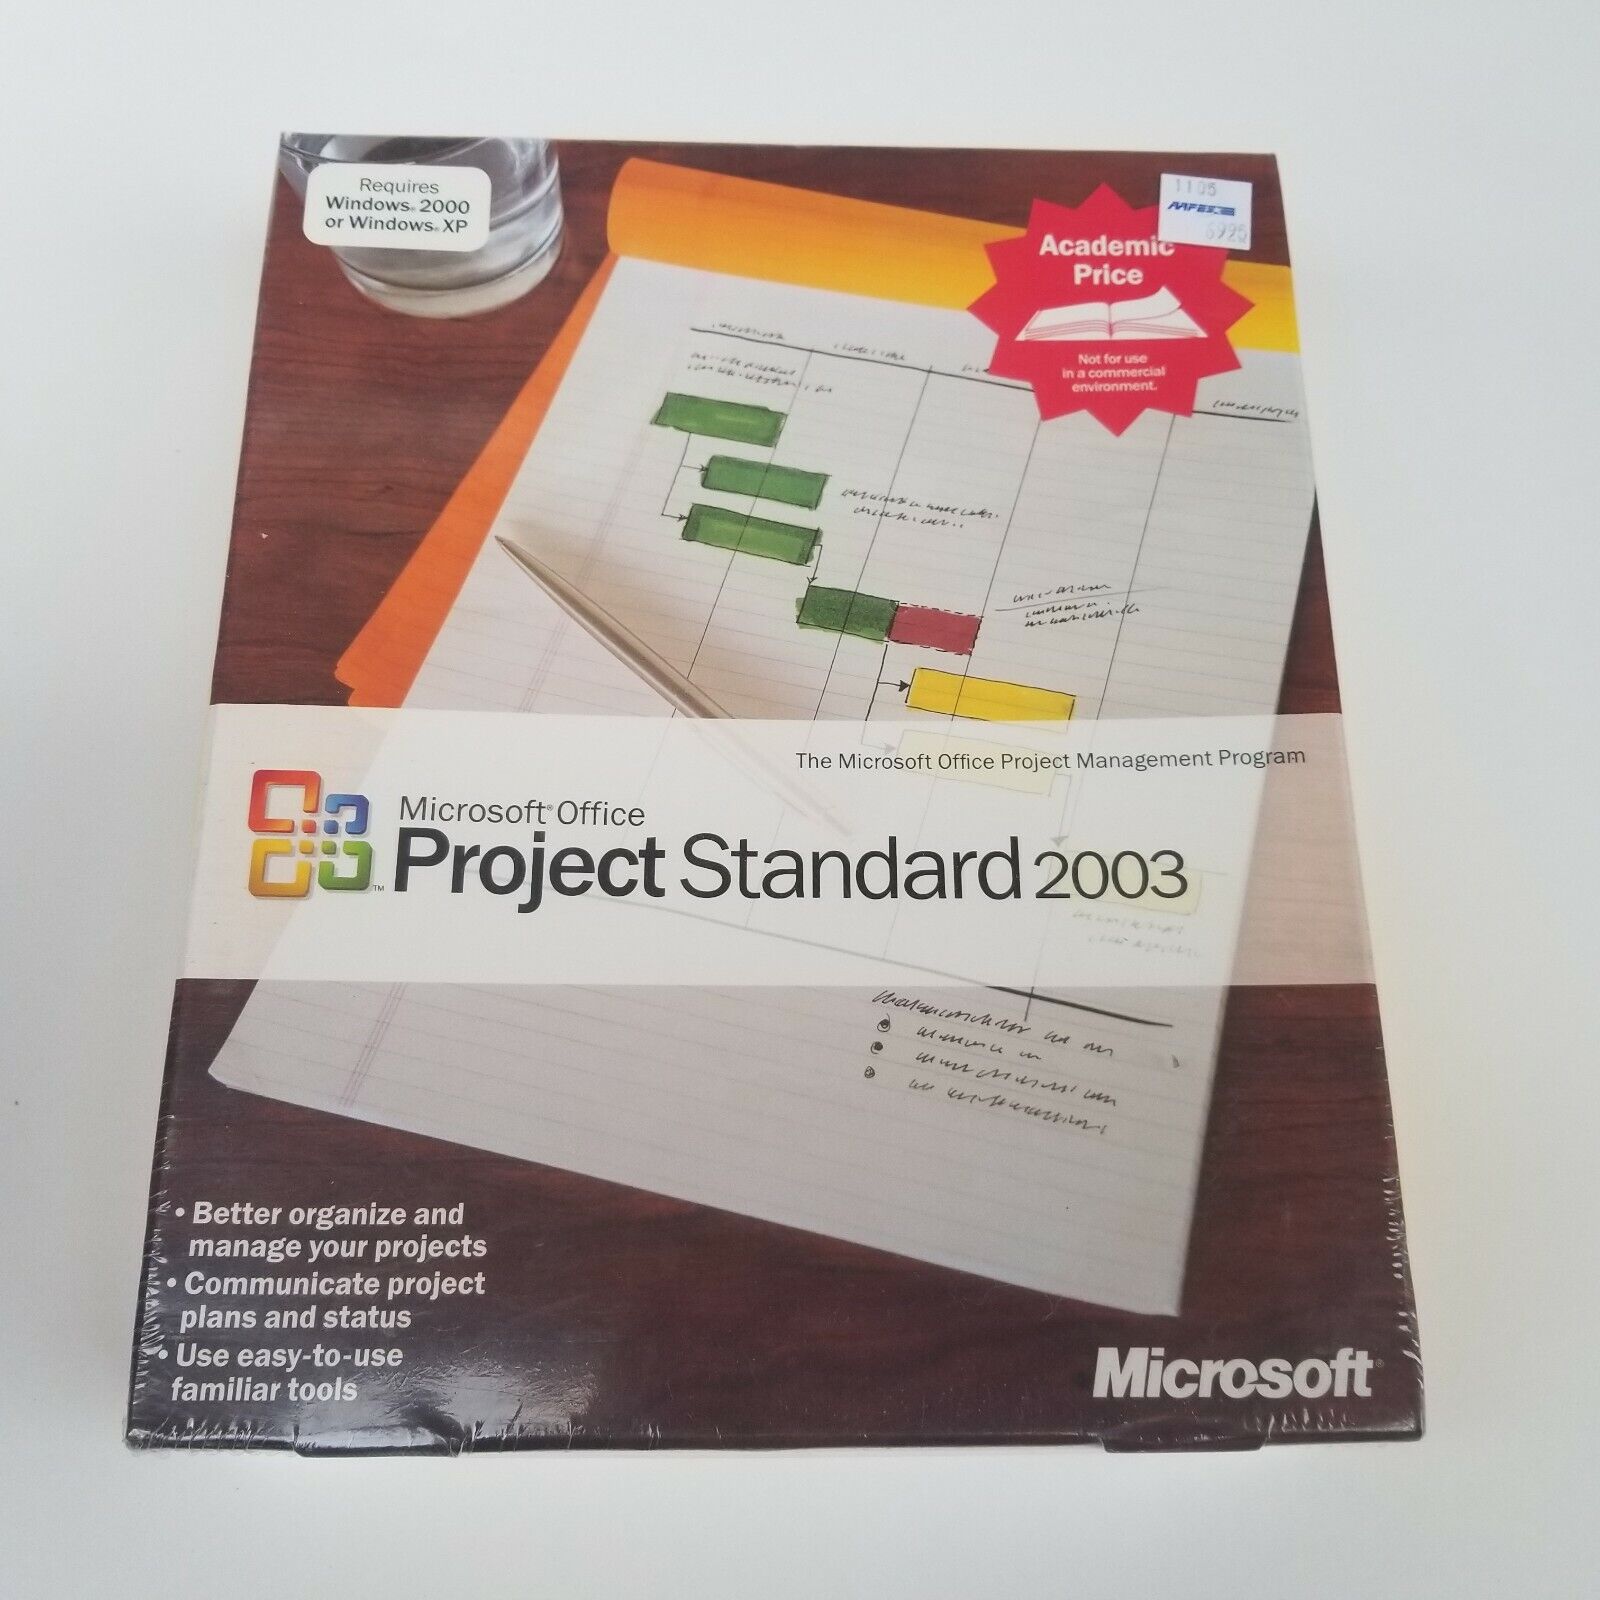 NEW  Microsoft Office Project Standard 2003 (Box has cosmetic flaws) SEALED BOX